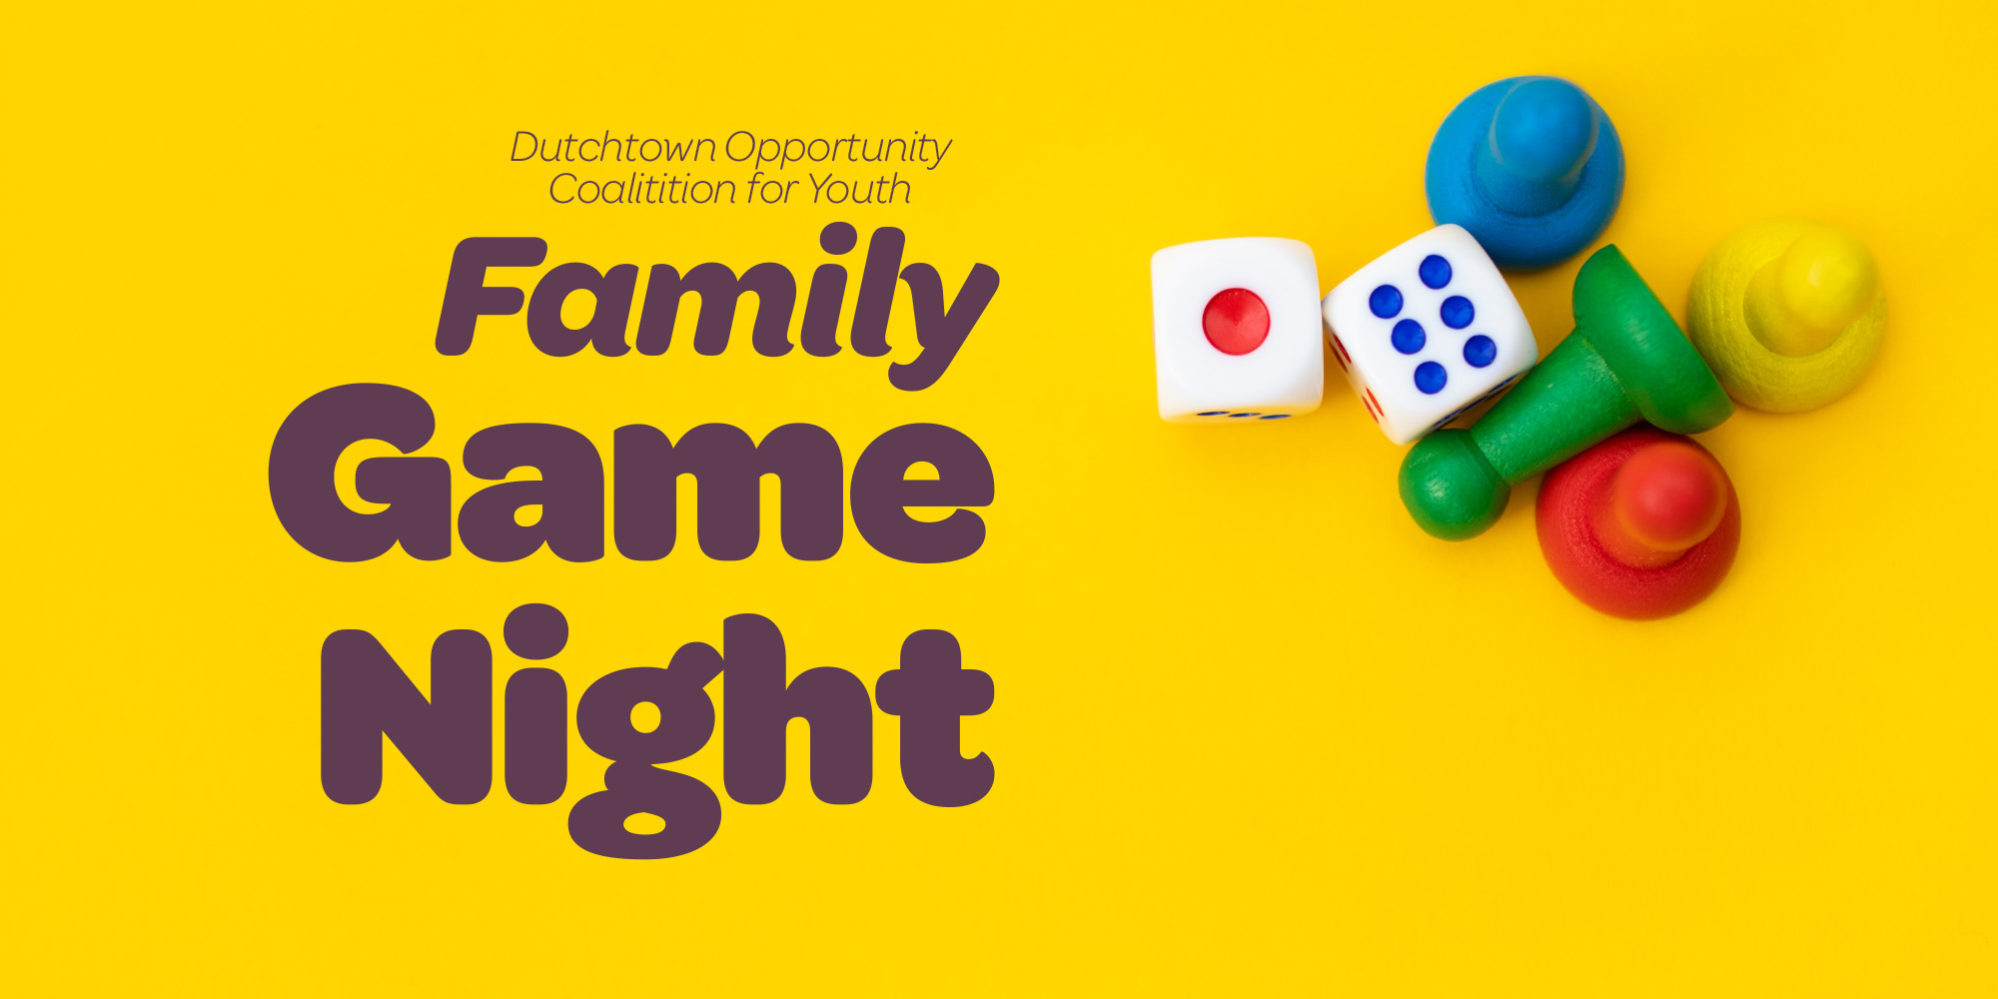 Dutchtown Opportunity Coalition for Youth's Family Game Night at Thomas Dunn Learning Center.